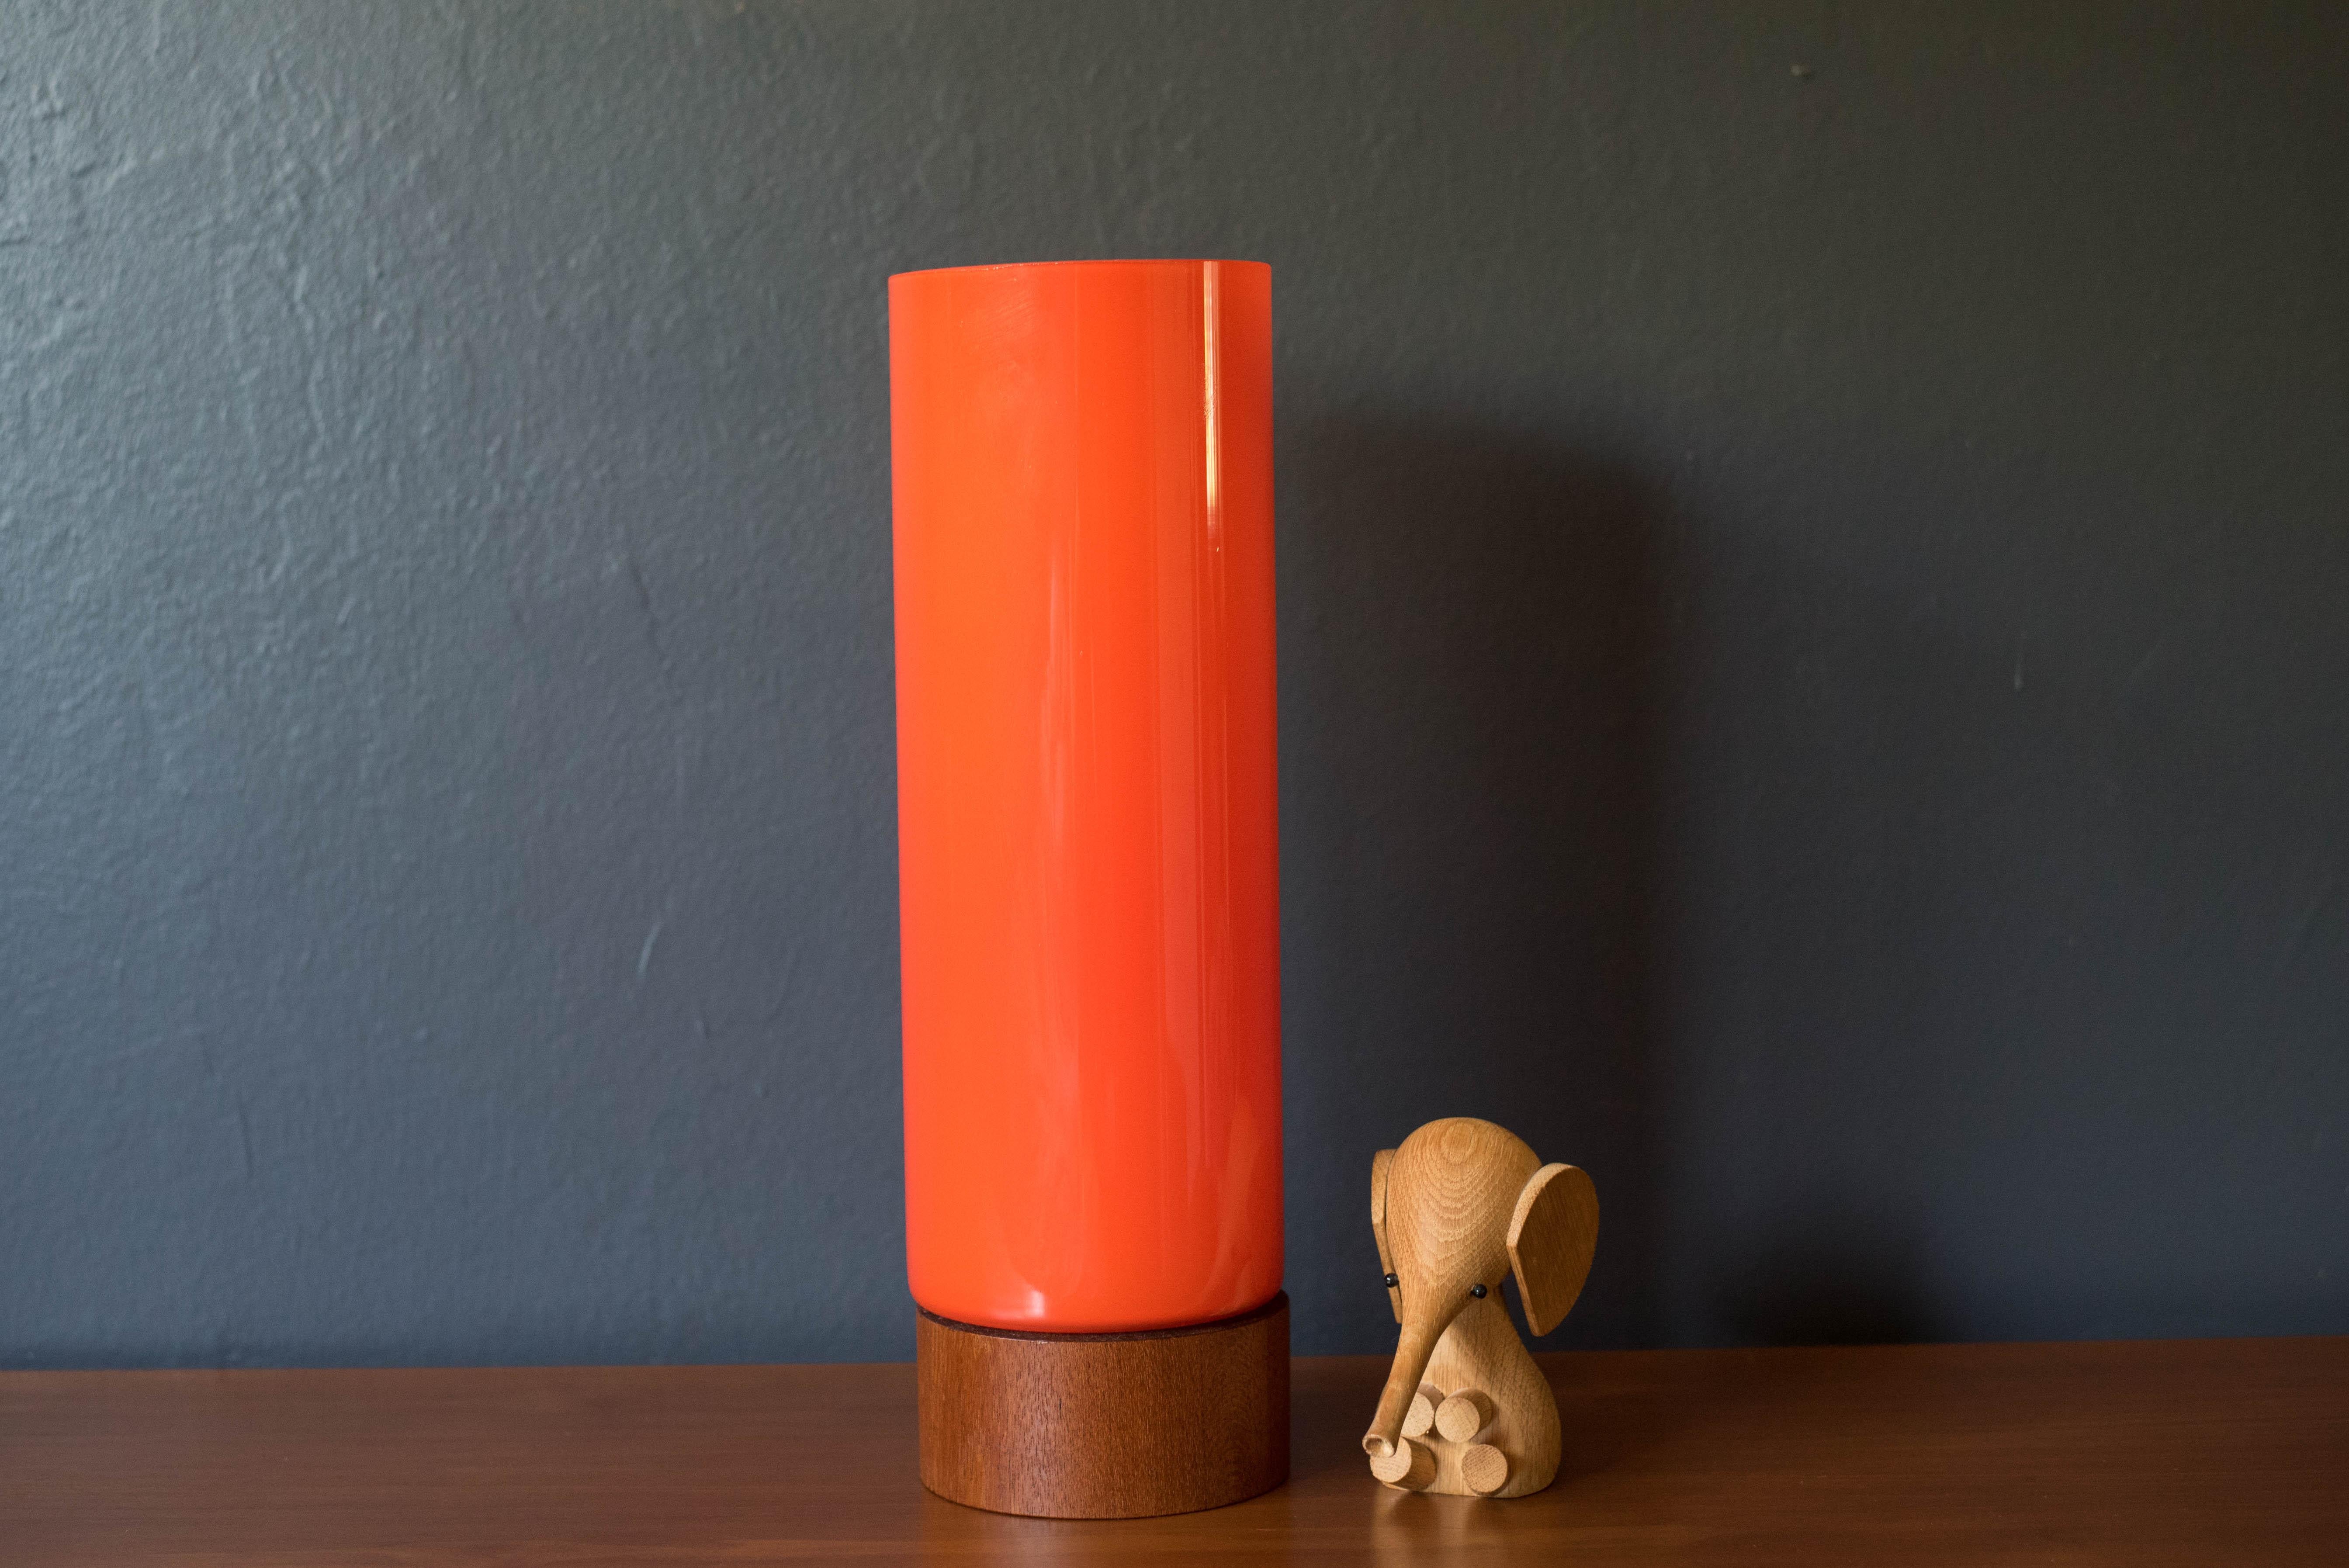 Vintage Scandinavian modern accent table lamp circa 1960s. This piece is encased with a vibrant orange cylinder hand blown glass shade accented with a white frosted interior and a supporting teak base.